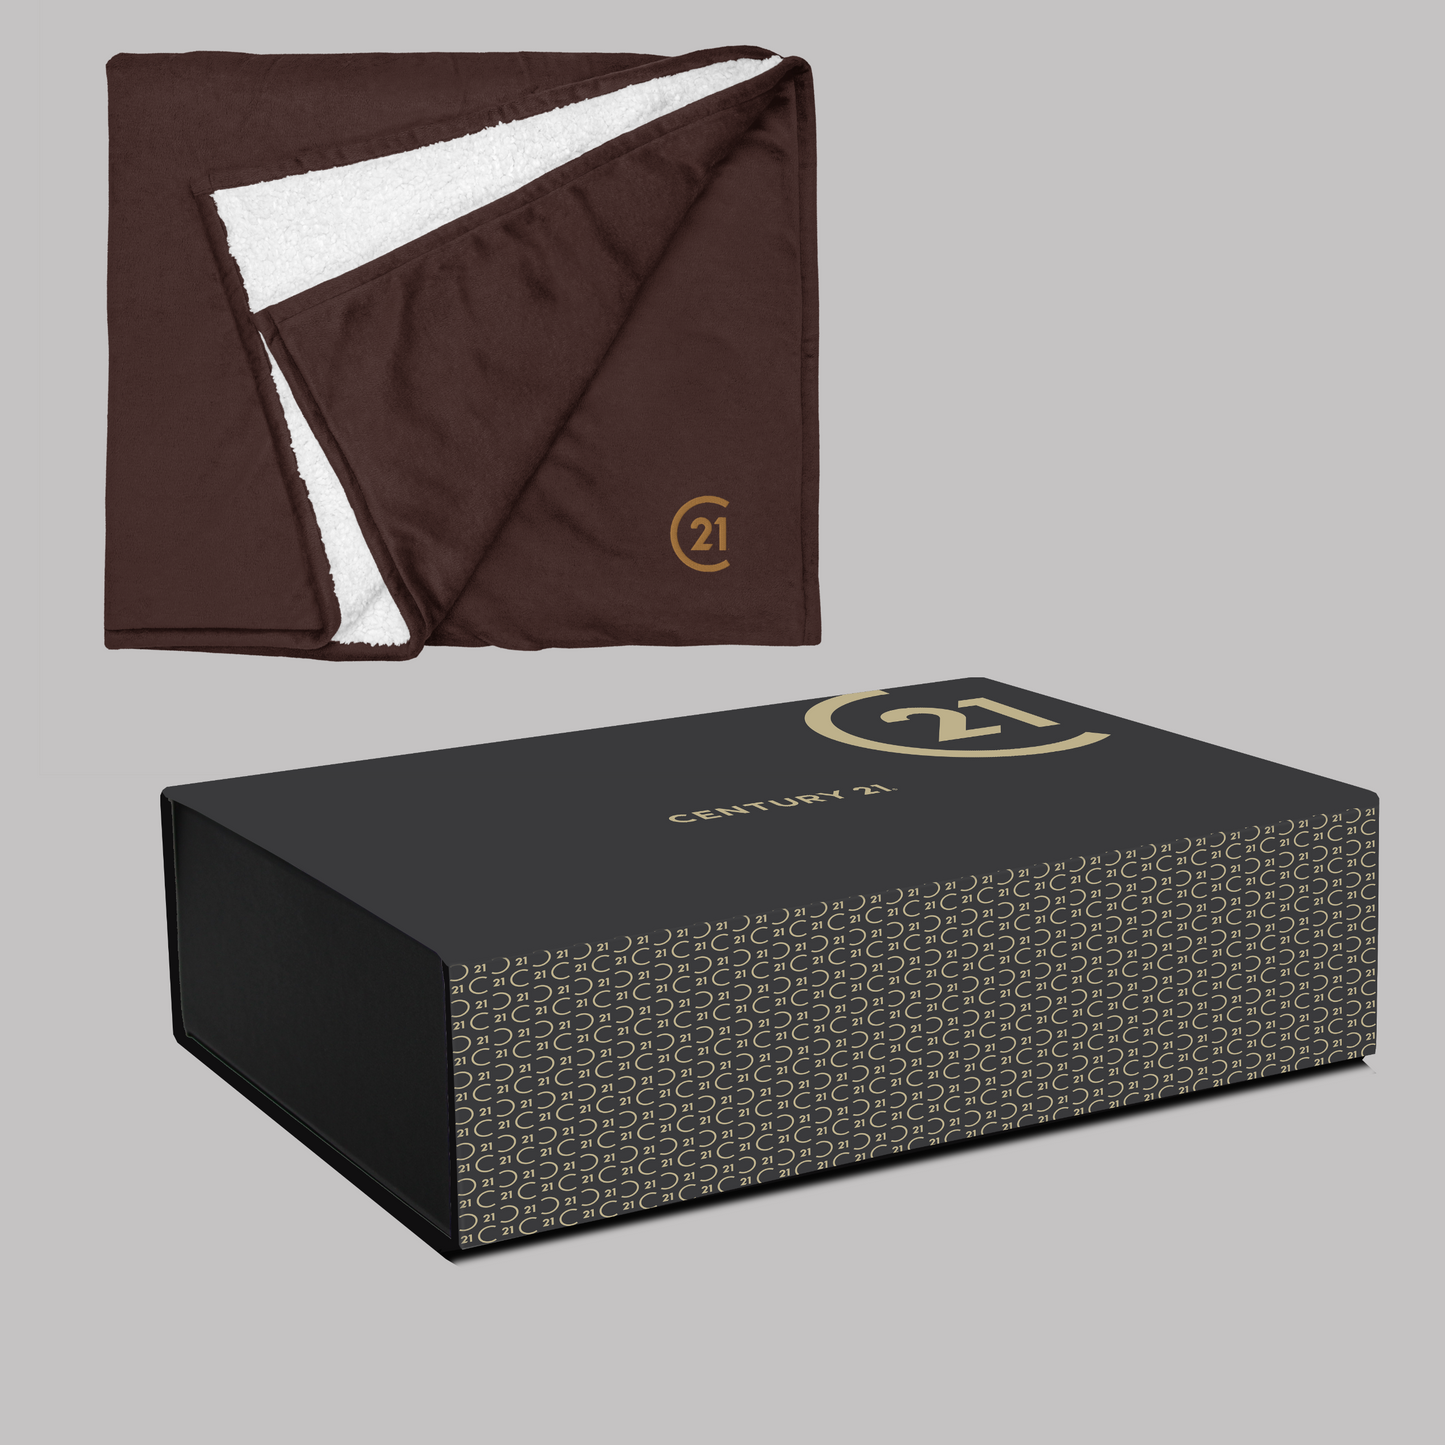 C21 Branded Closing Gift Box with Century 21 Blanket (from $$91 per complete box)